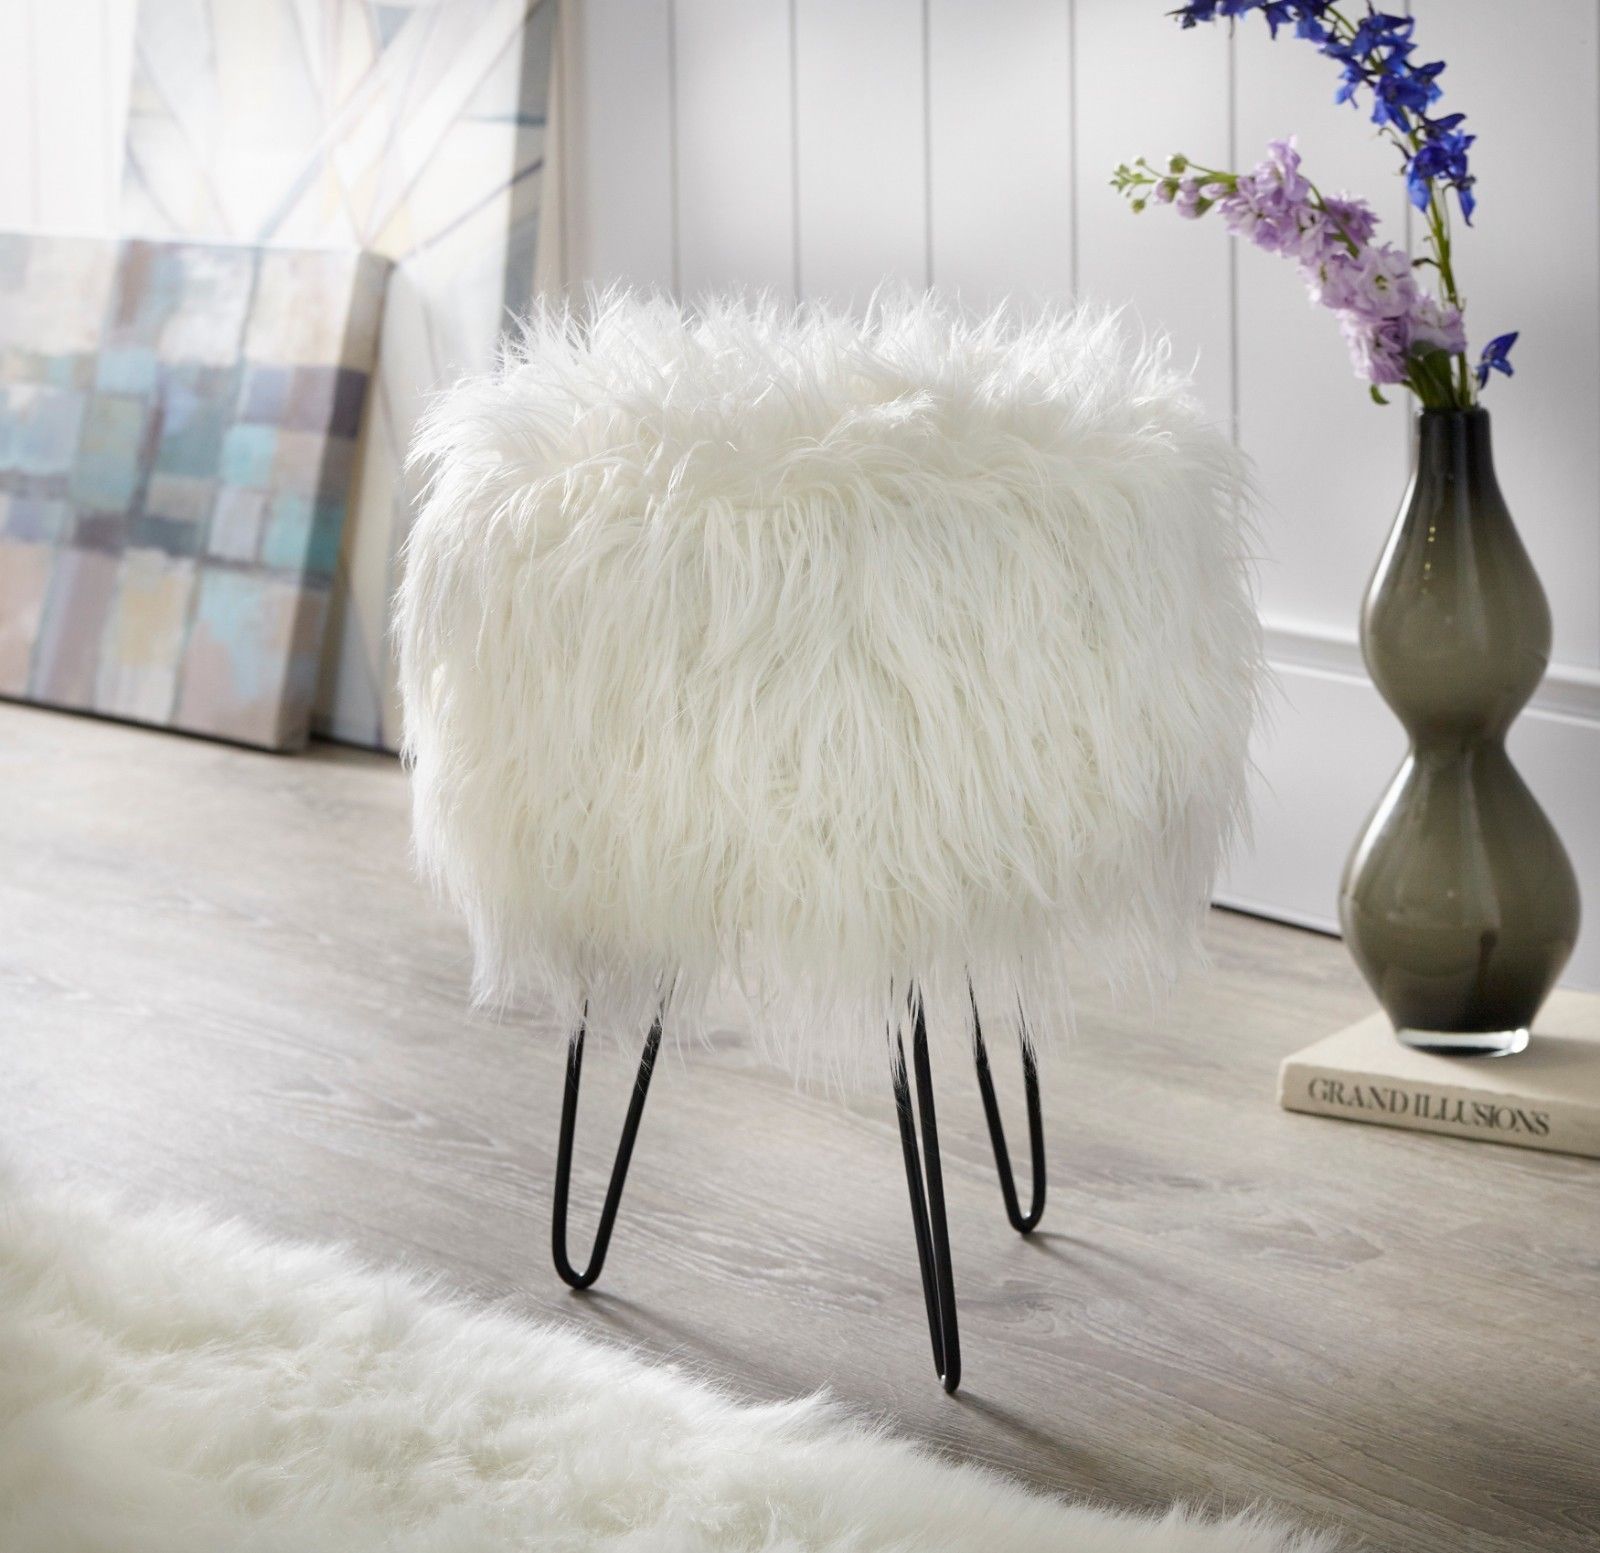 Bohemian Glam 14" Round White Faux Fur Ottoman Footstool Footrest In White Faux Fur And Gold Metal Ottomans (View 2 of 20)